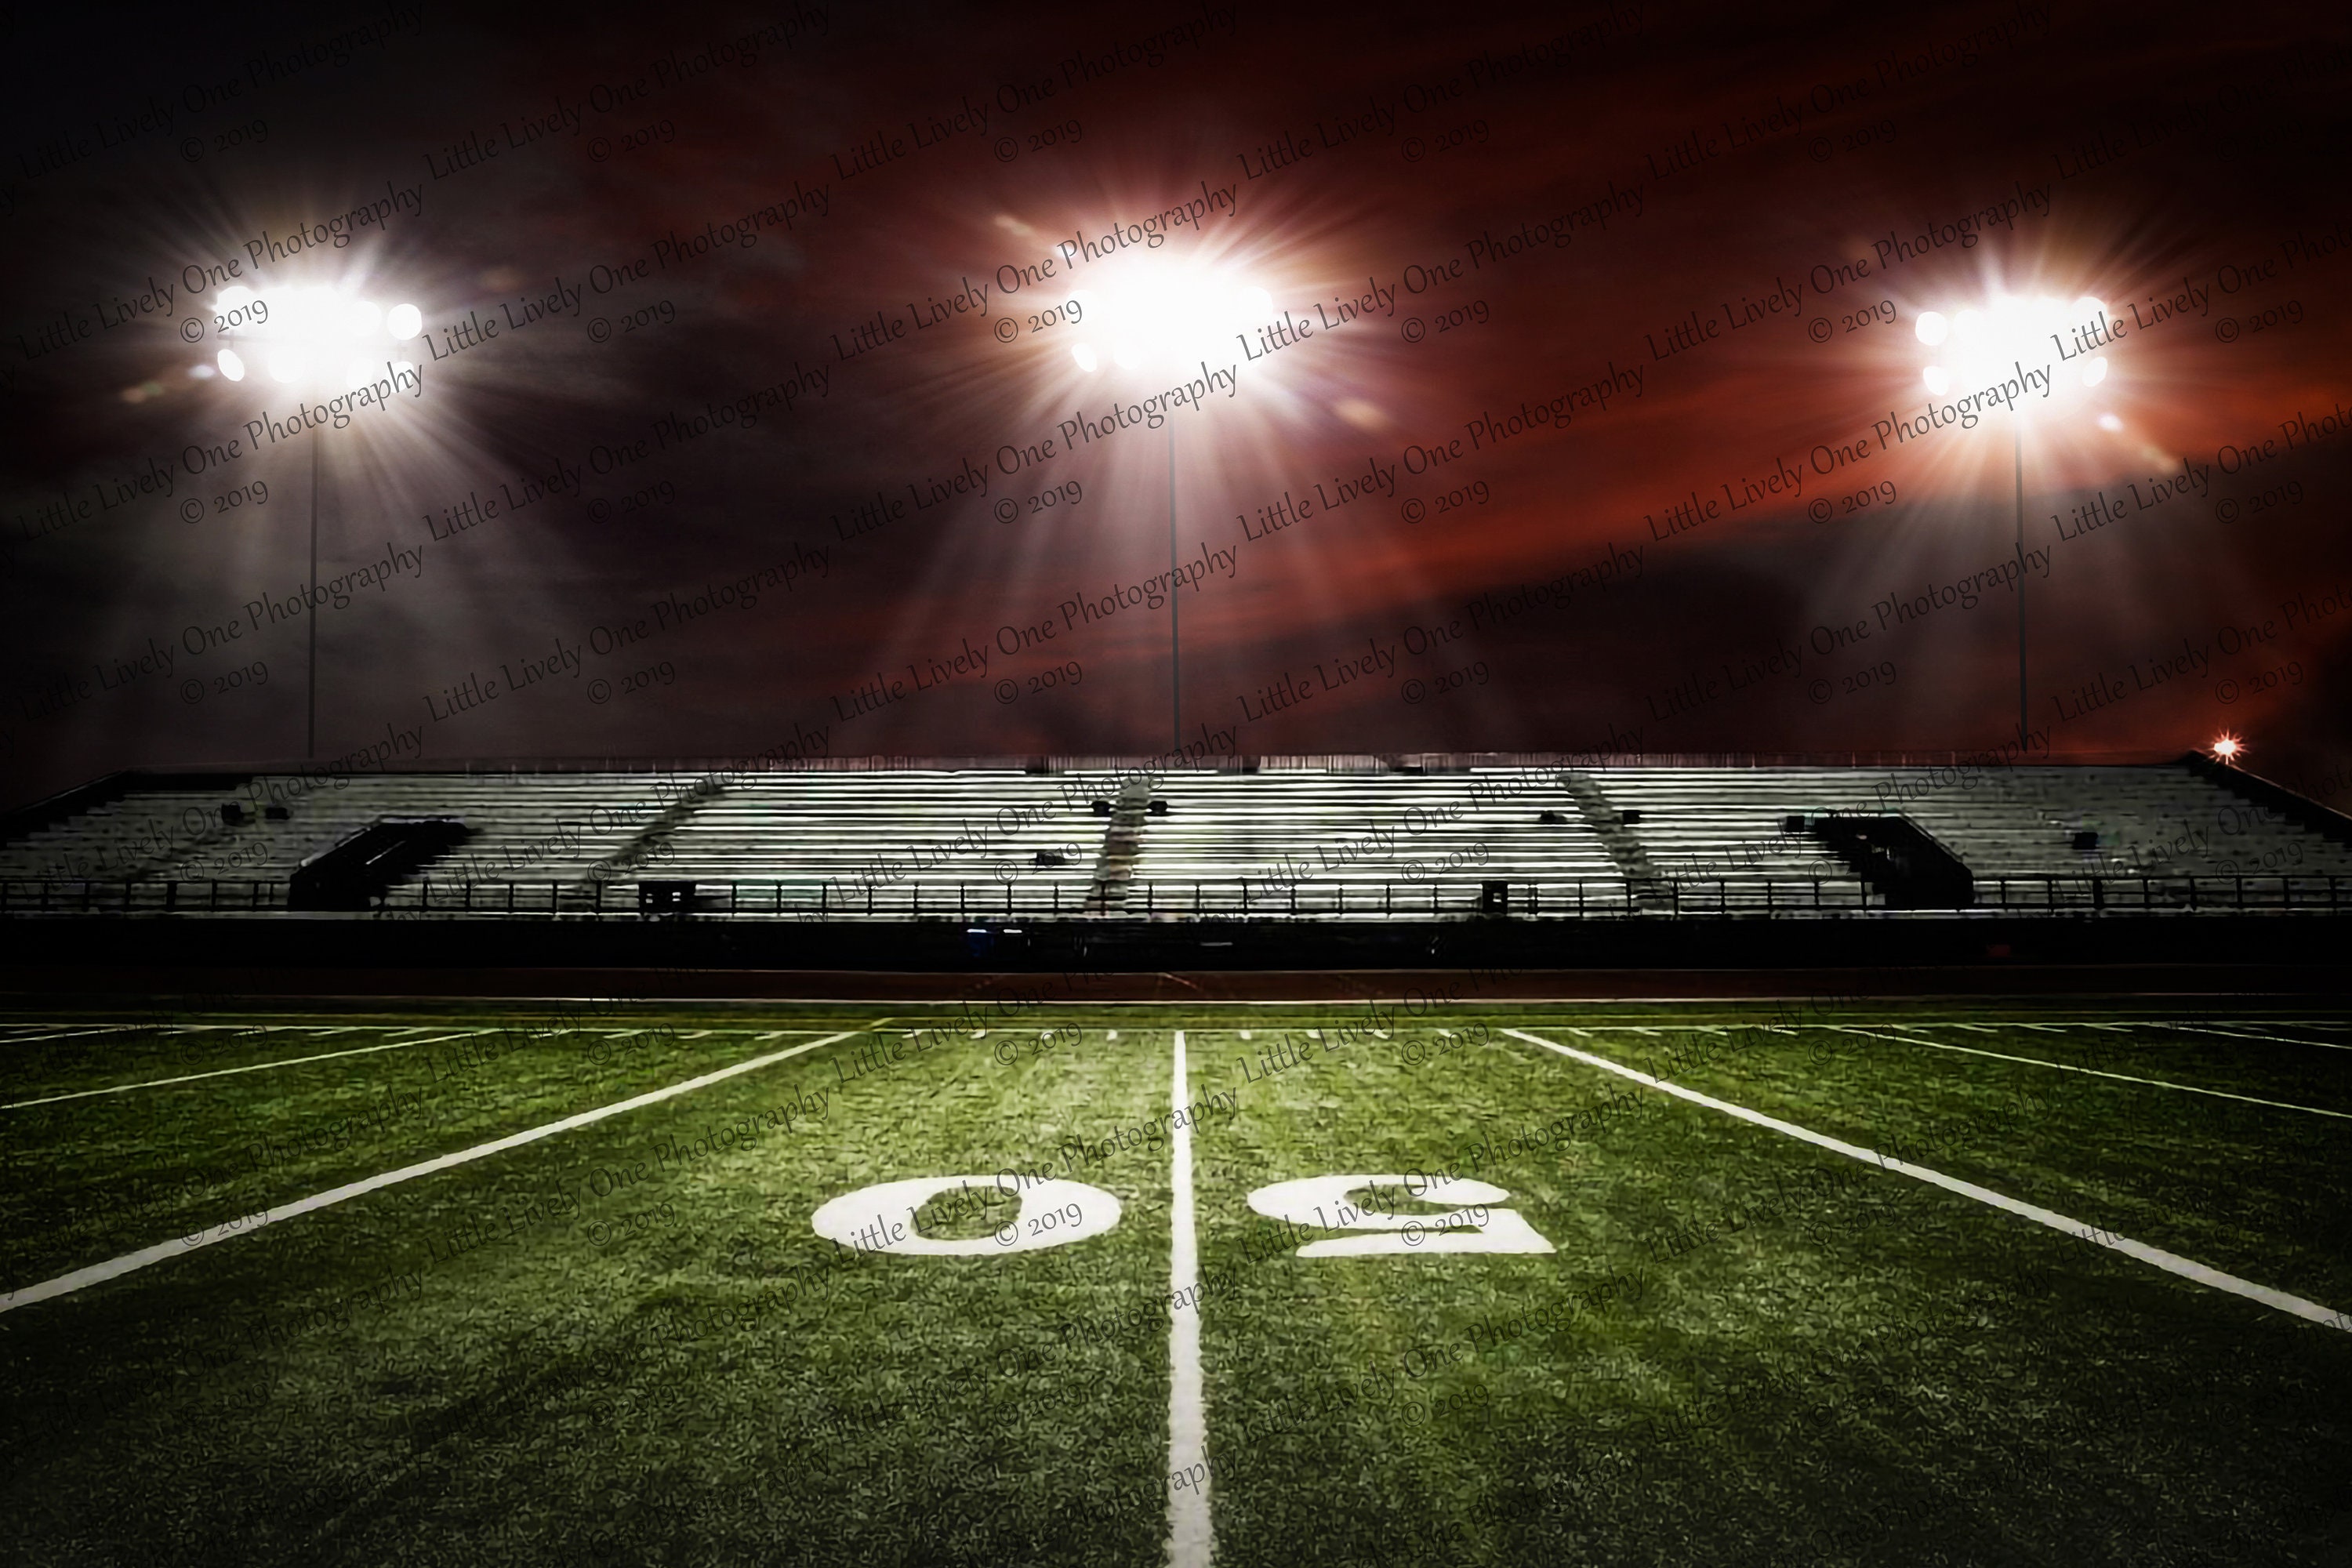 Football Backgrounds For Photoshop